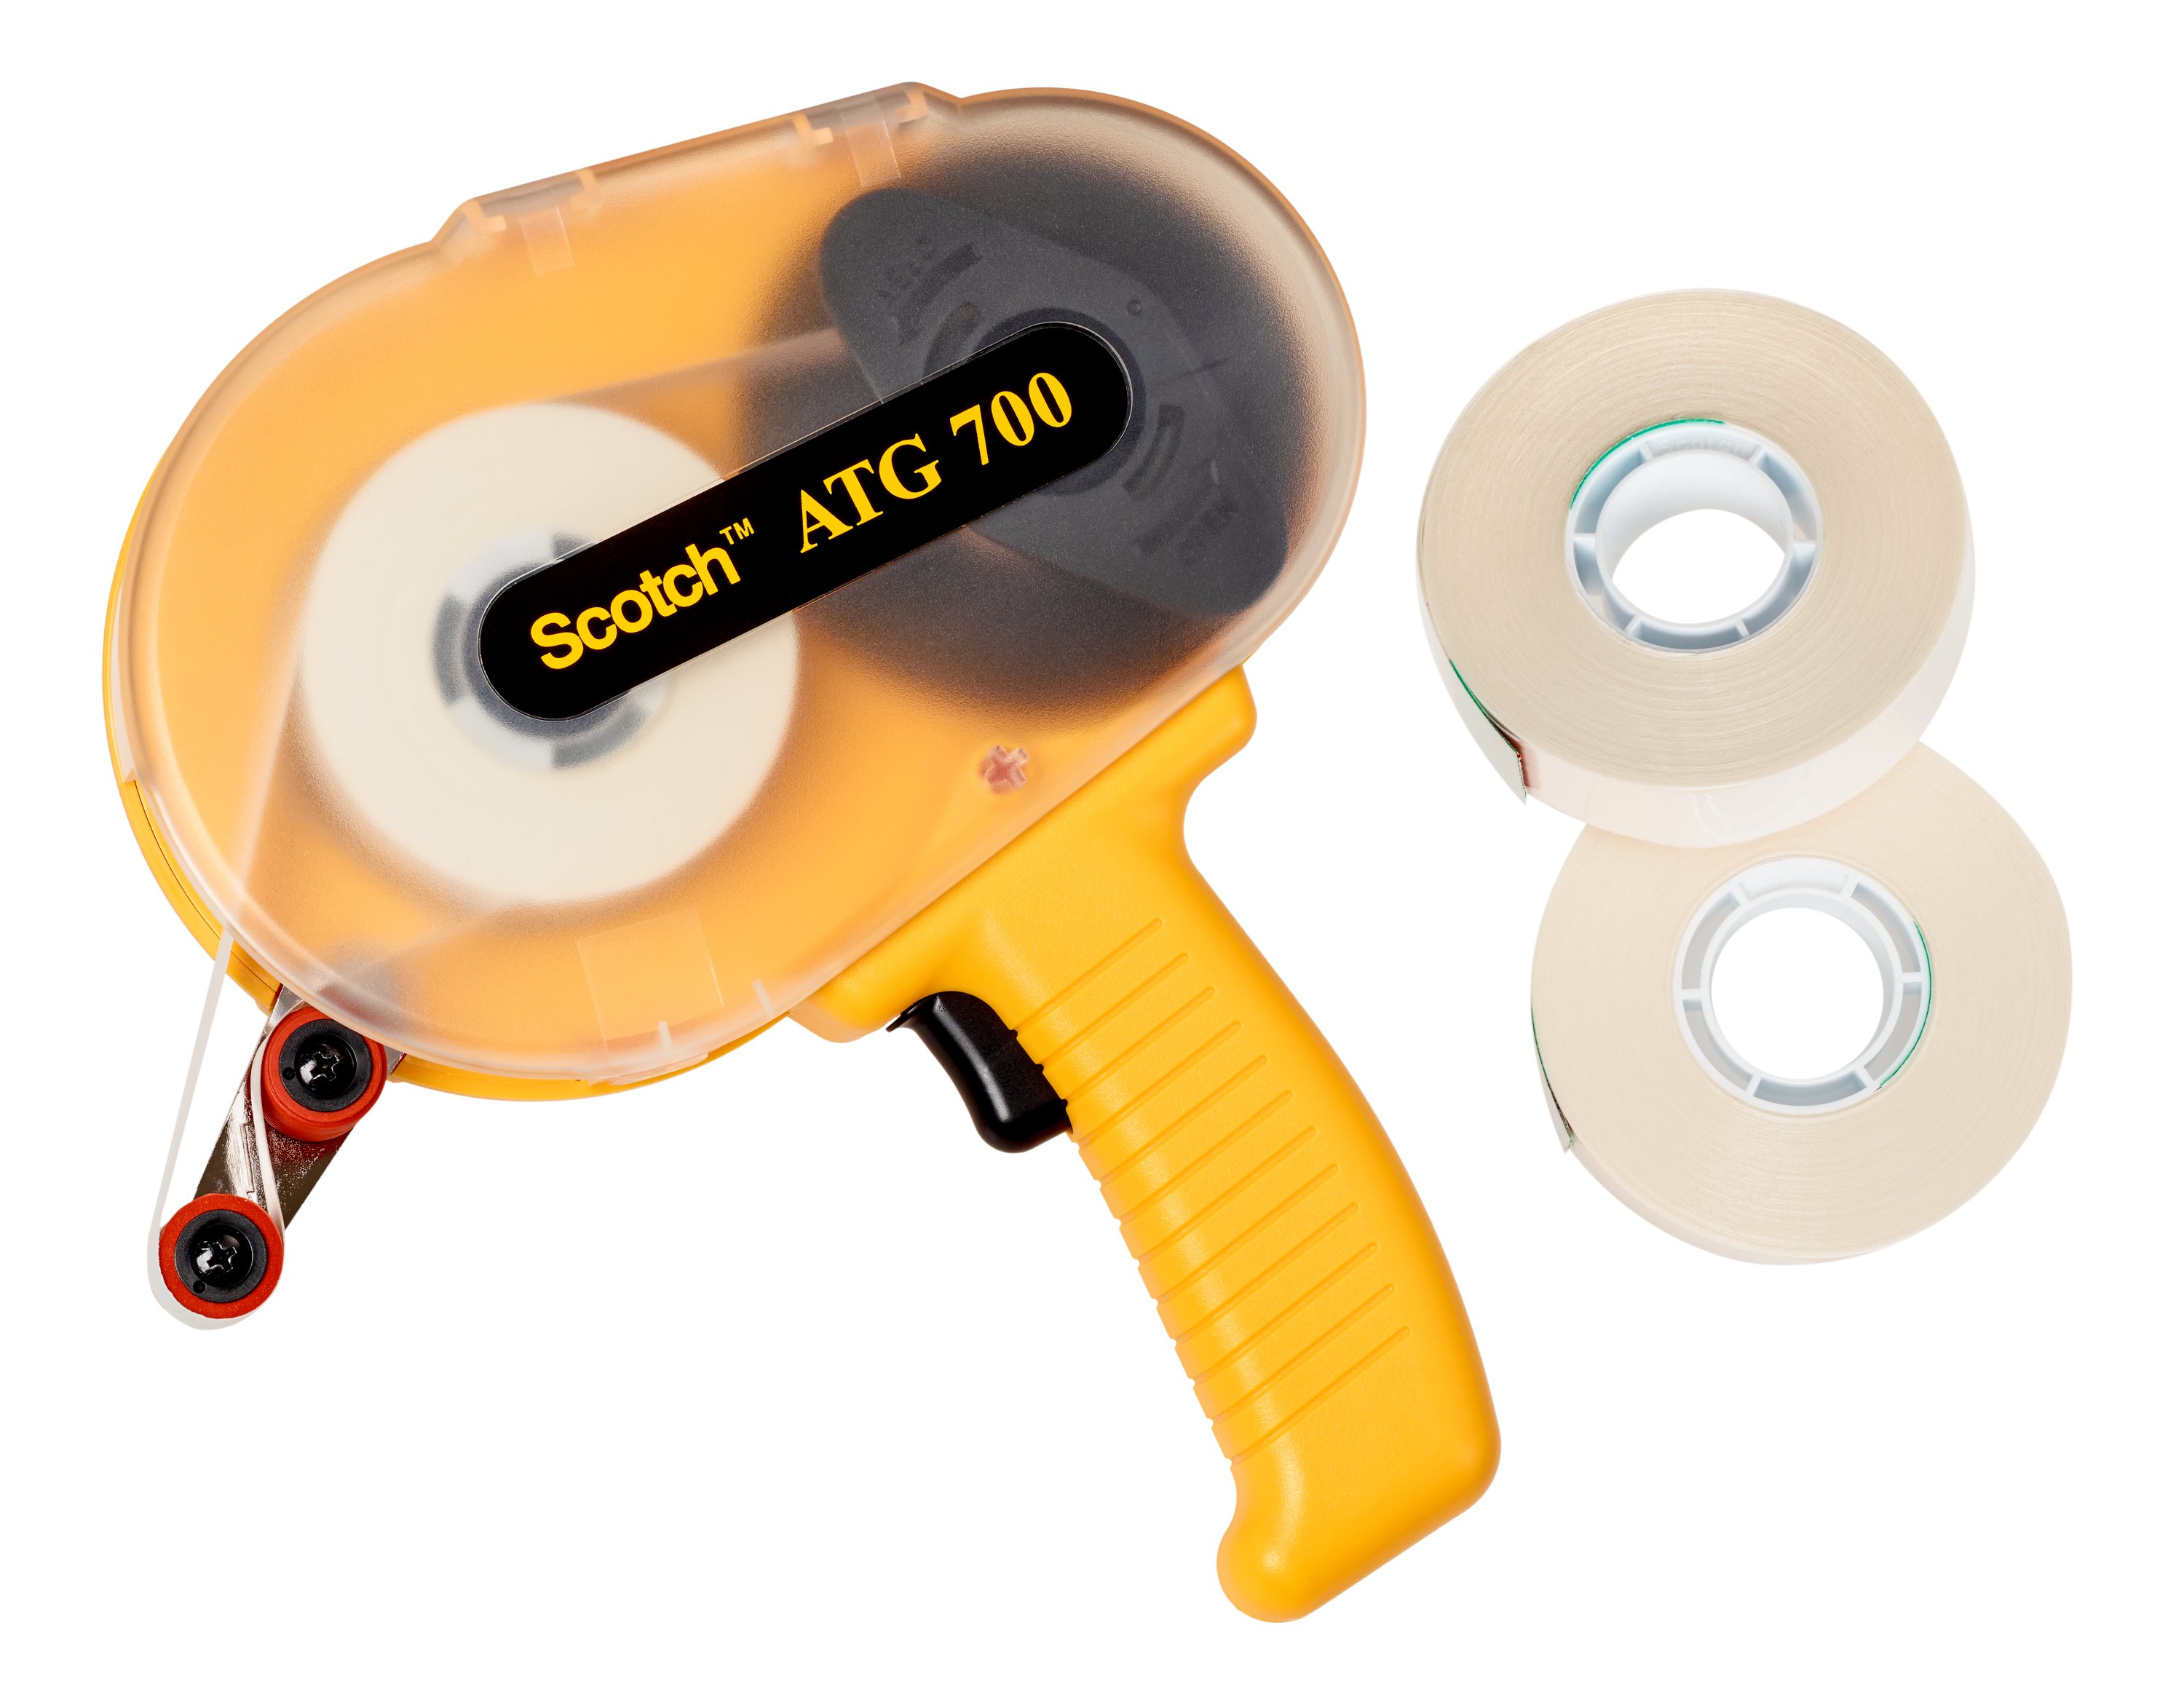 With Scotch® ATG Applicators, a touch of the finger triggers a quick, controlled application of Scotch® ATG Transfer Tape at the same time as the liner rewinds into the applicator.